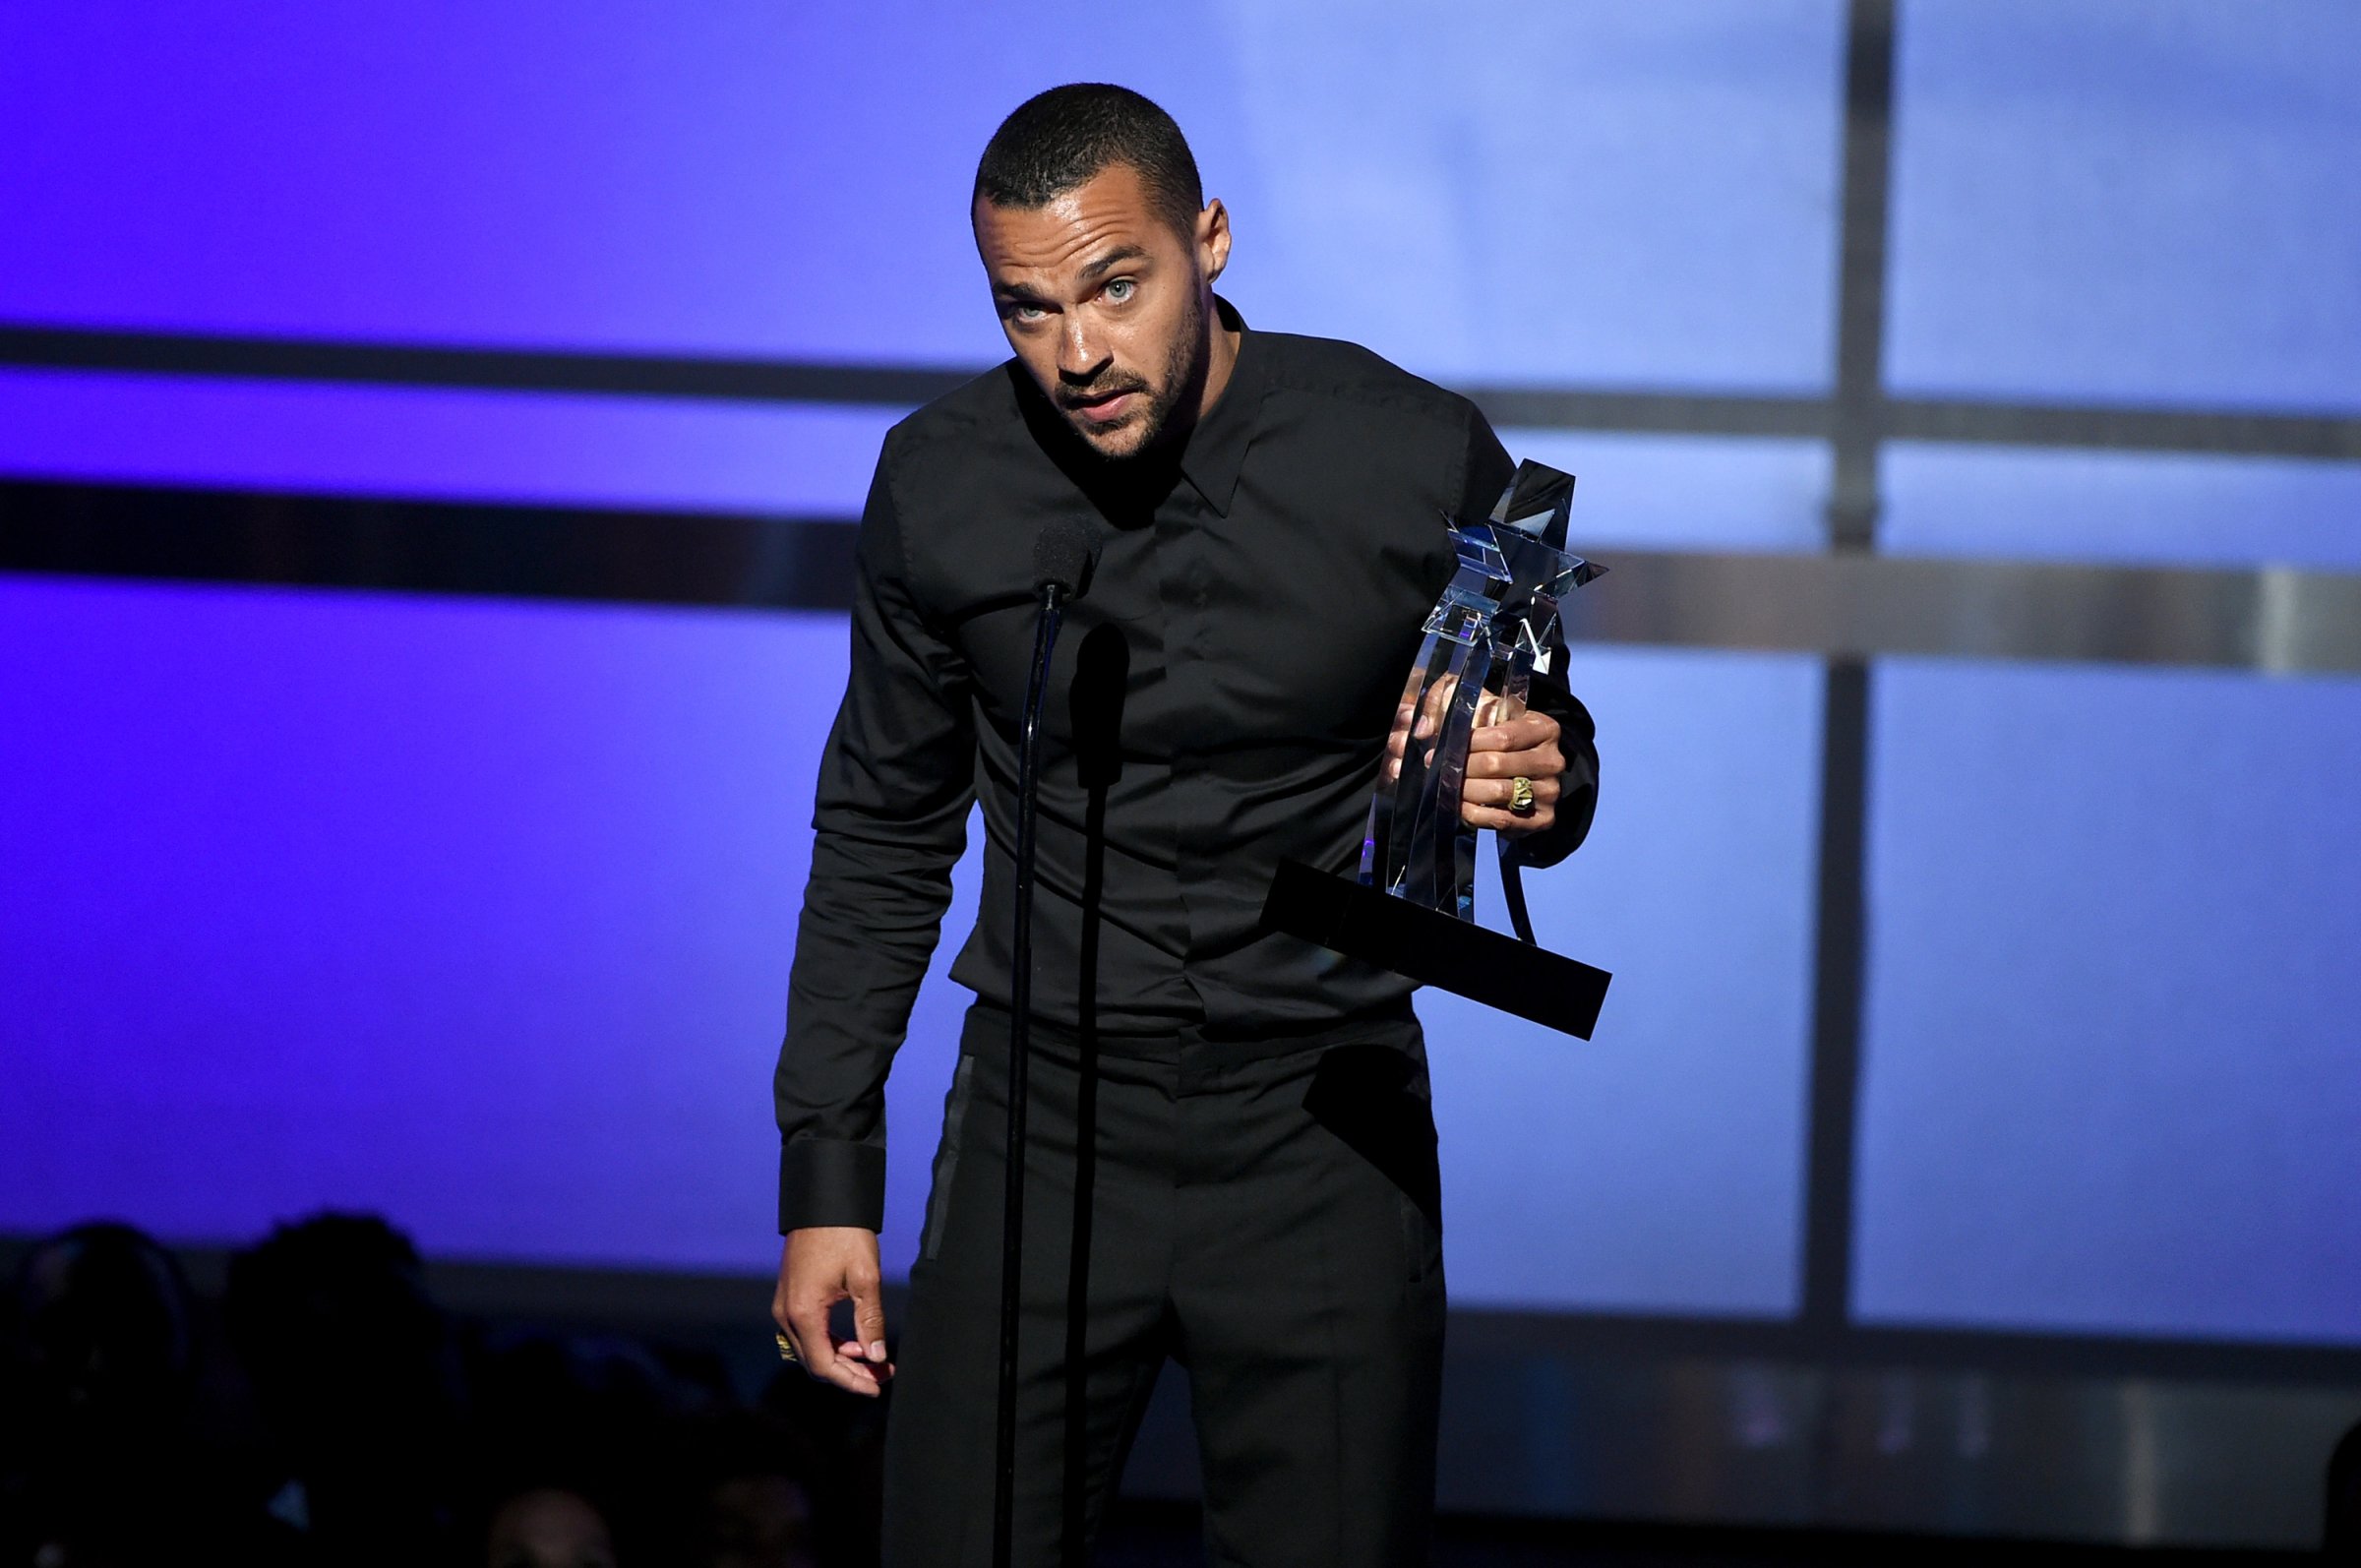 Honoree Jesse Williams accepts the Humanitarian Award onstage during the 2016 BET Awards at the Microsoft Theater on June 26, 2016 in Los Angeles, California.